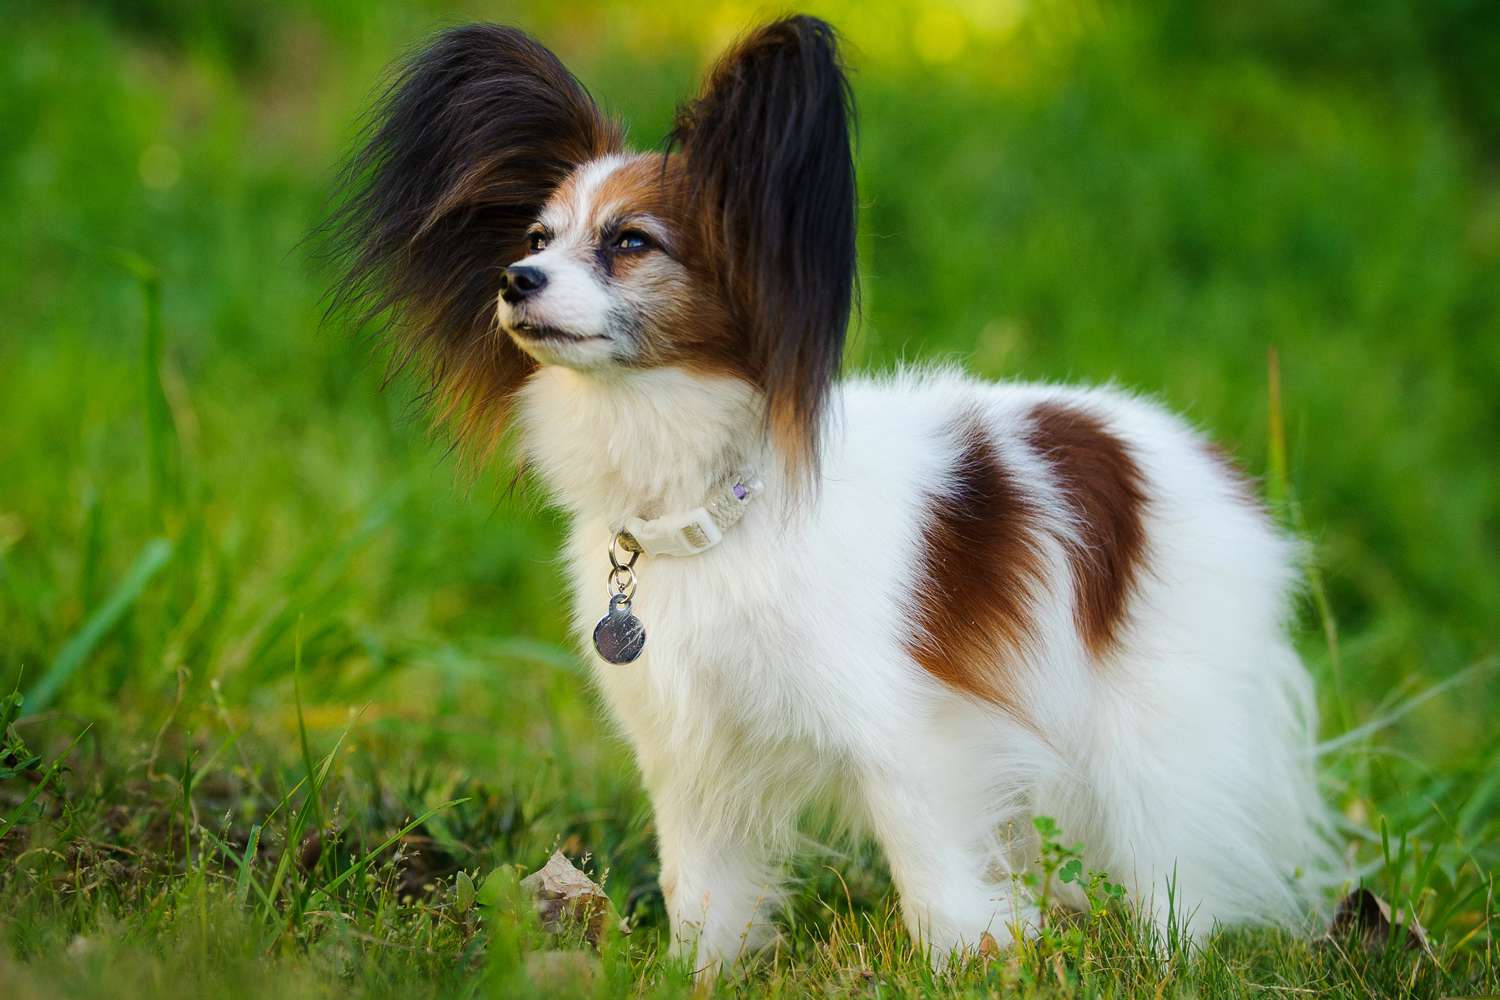 Standing side profile of a papillon dog on the grass